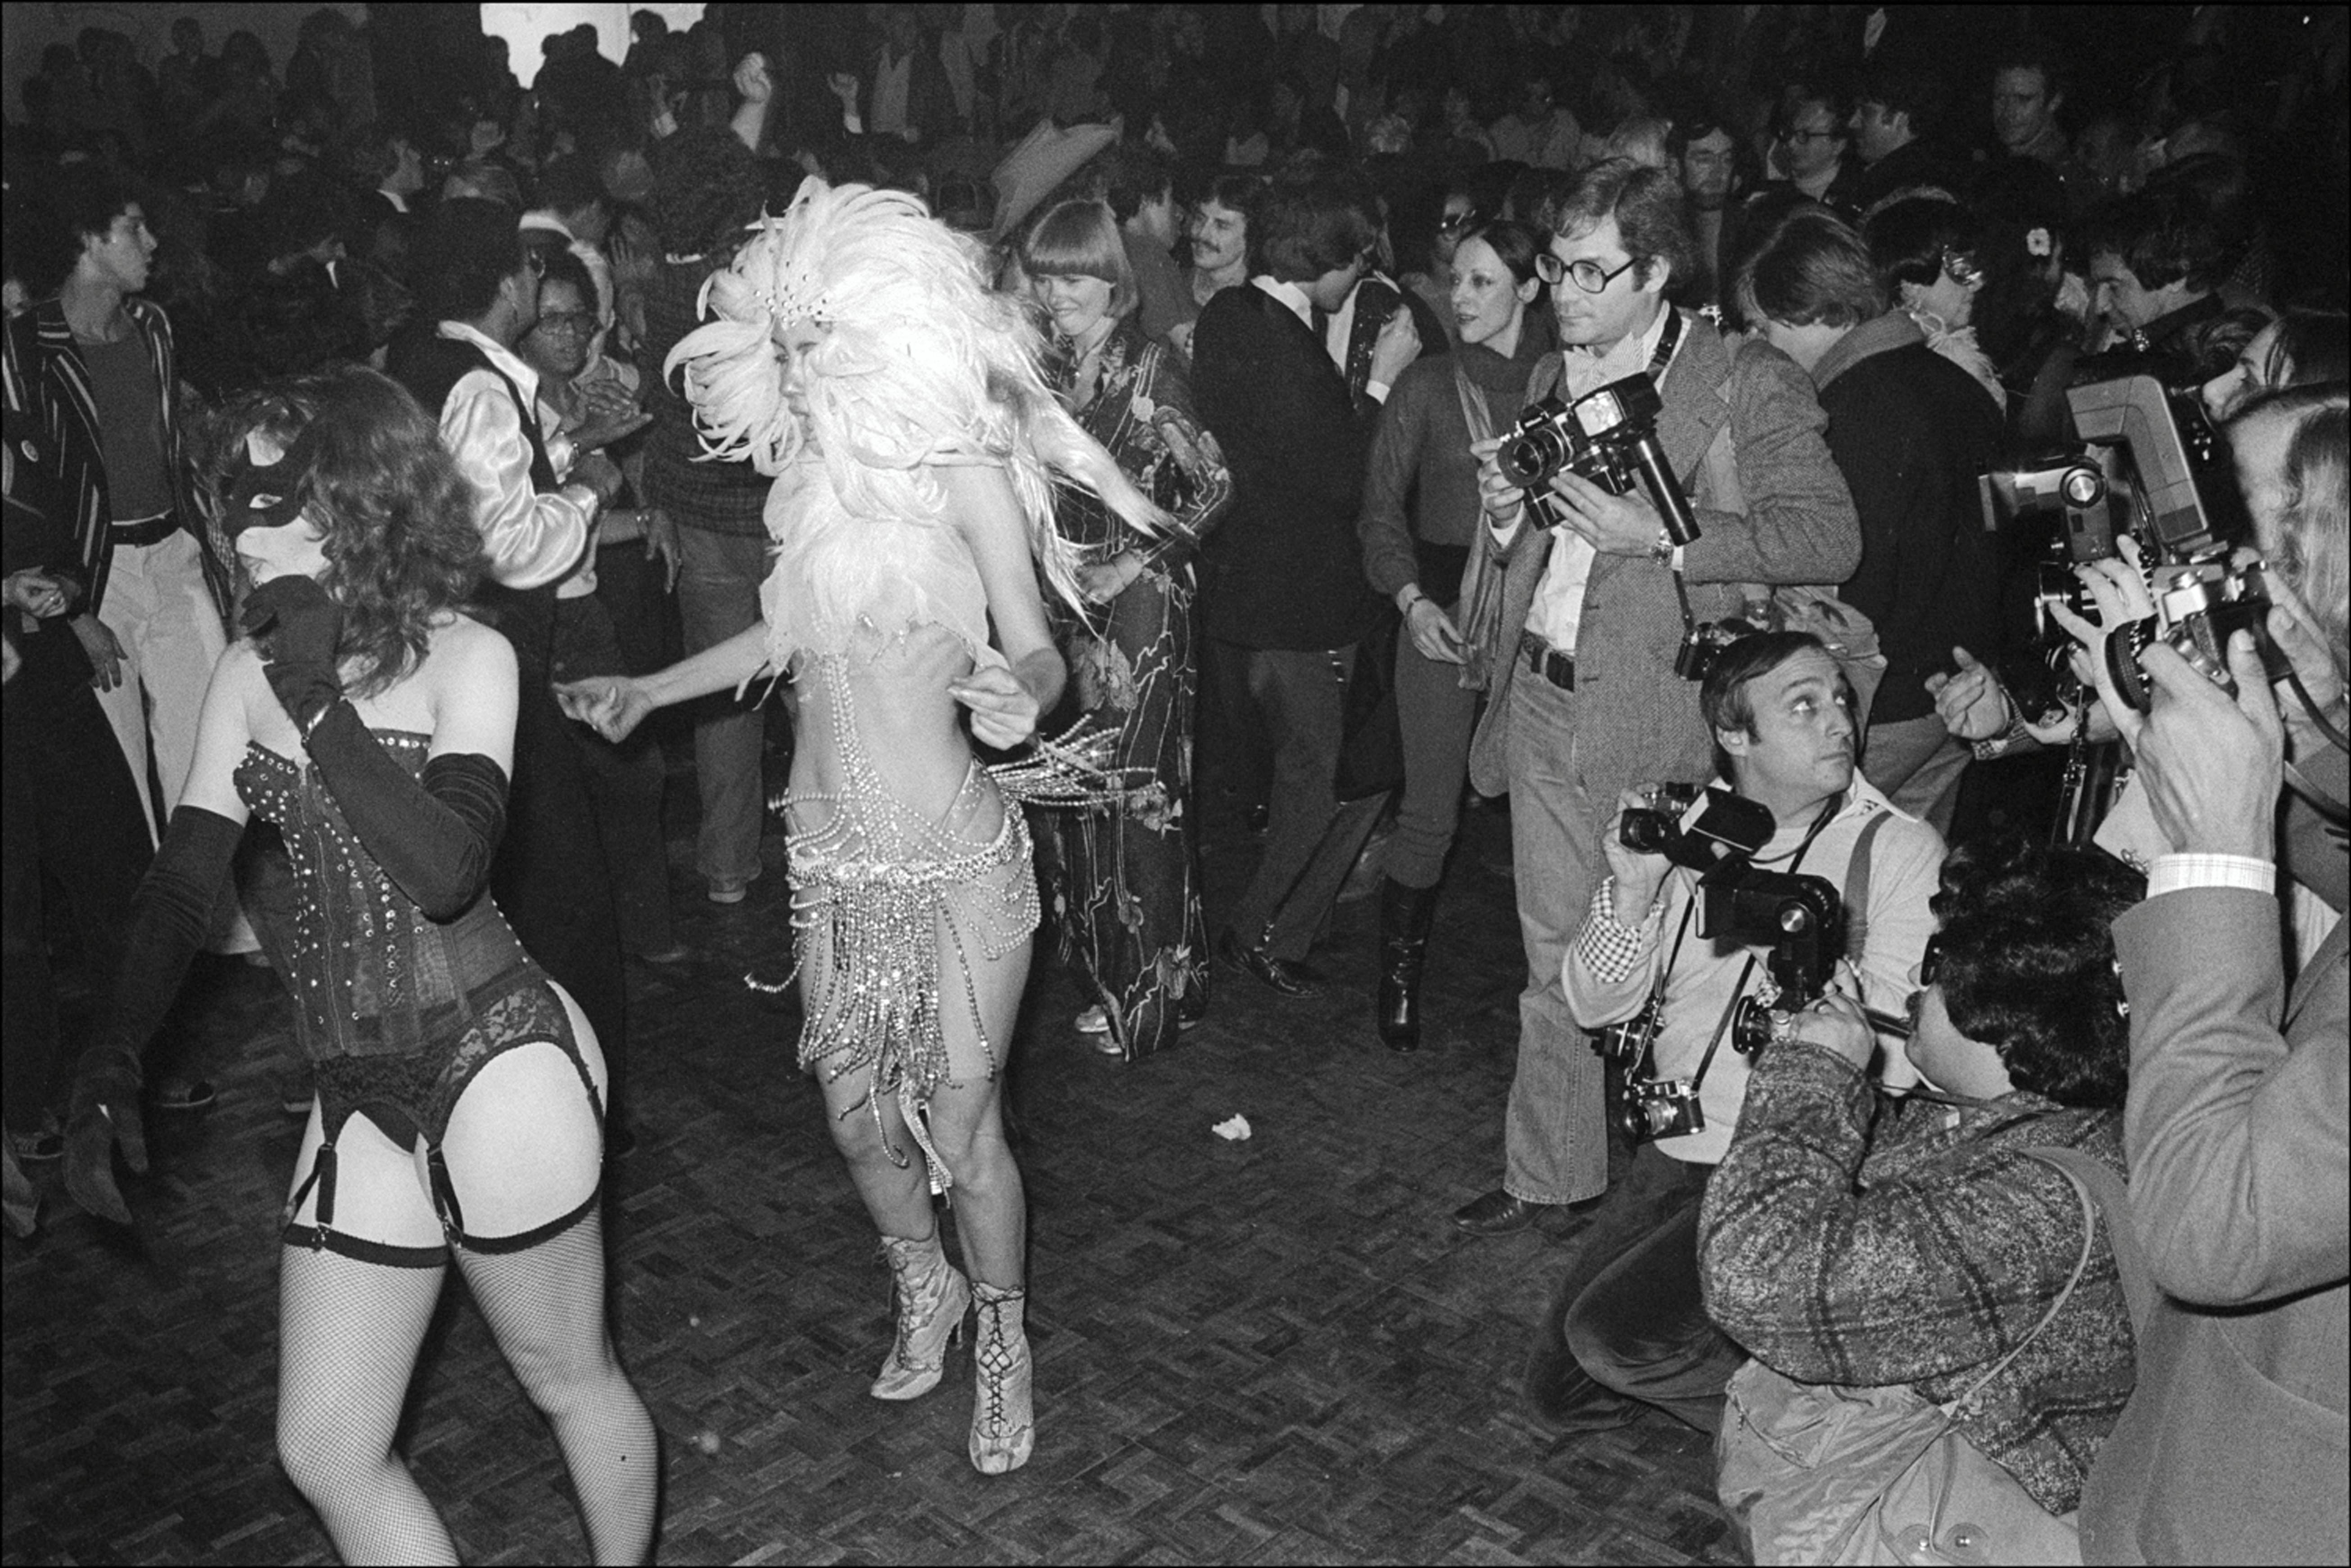 At the Hookers Ball, strippers, dancers, and activists took over San Francisco and partied for sex workers rights by Nina Renata Aron Timeline photo pic